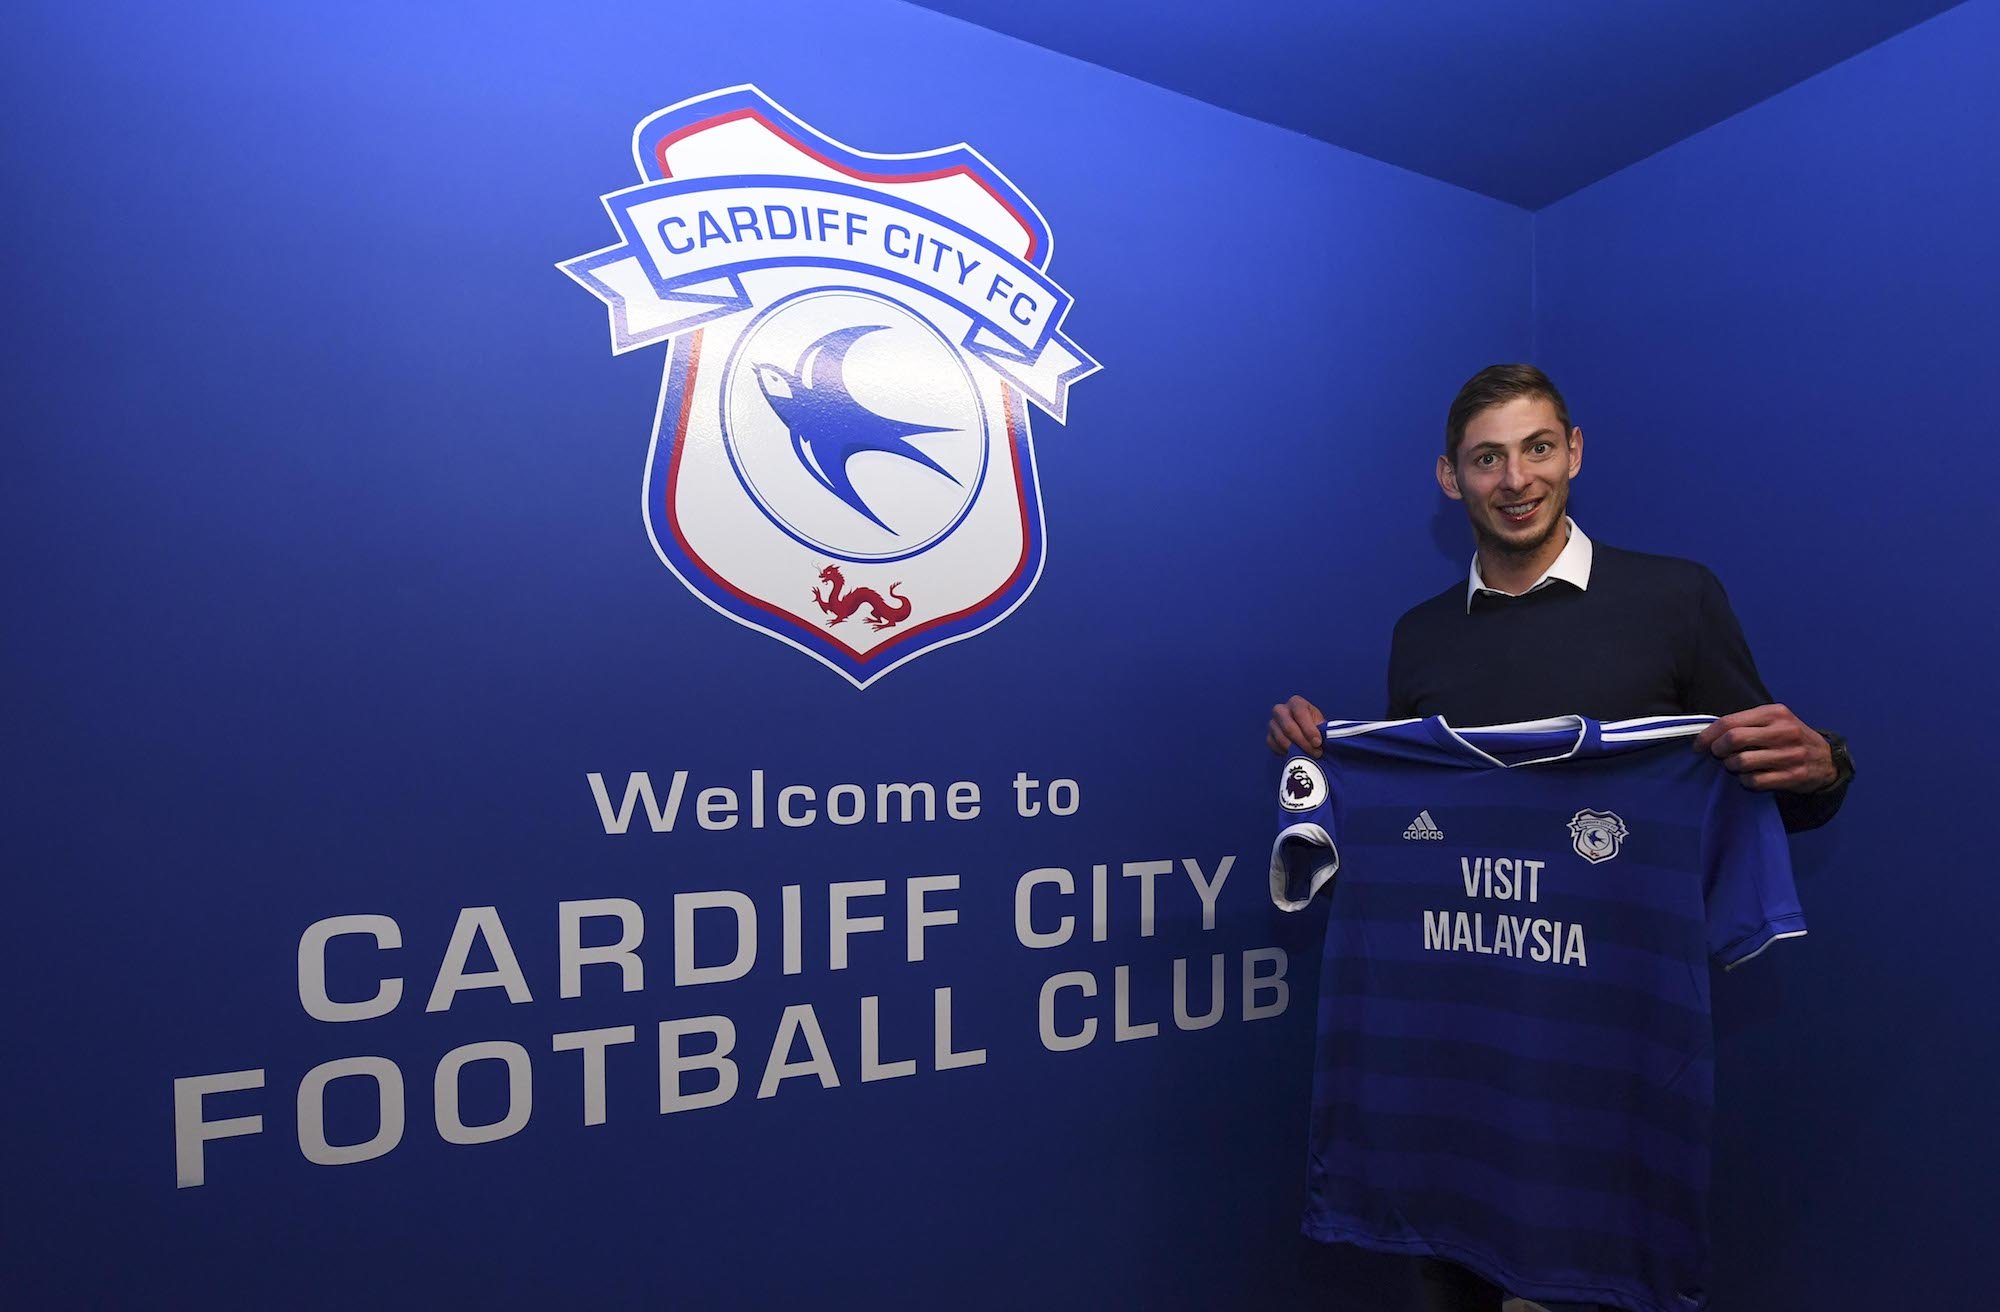 Cardiff City footballer recovering from malaria